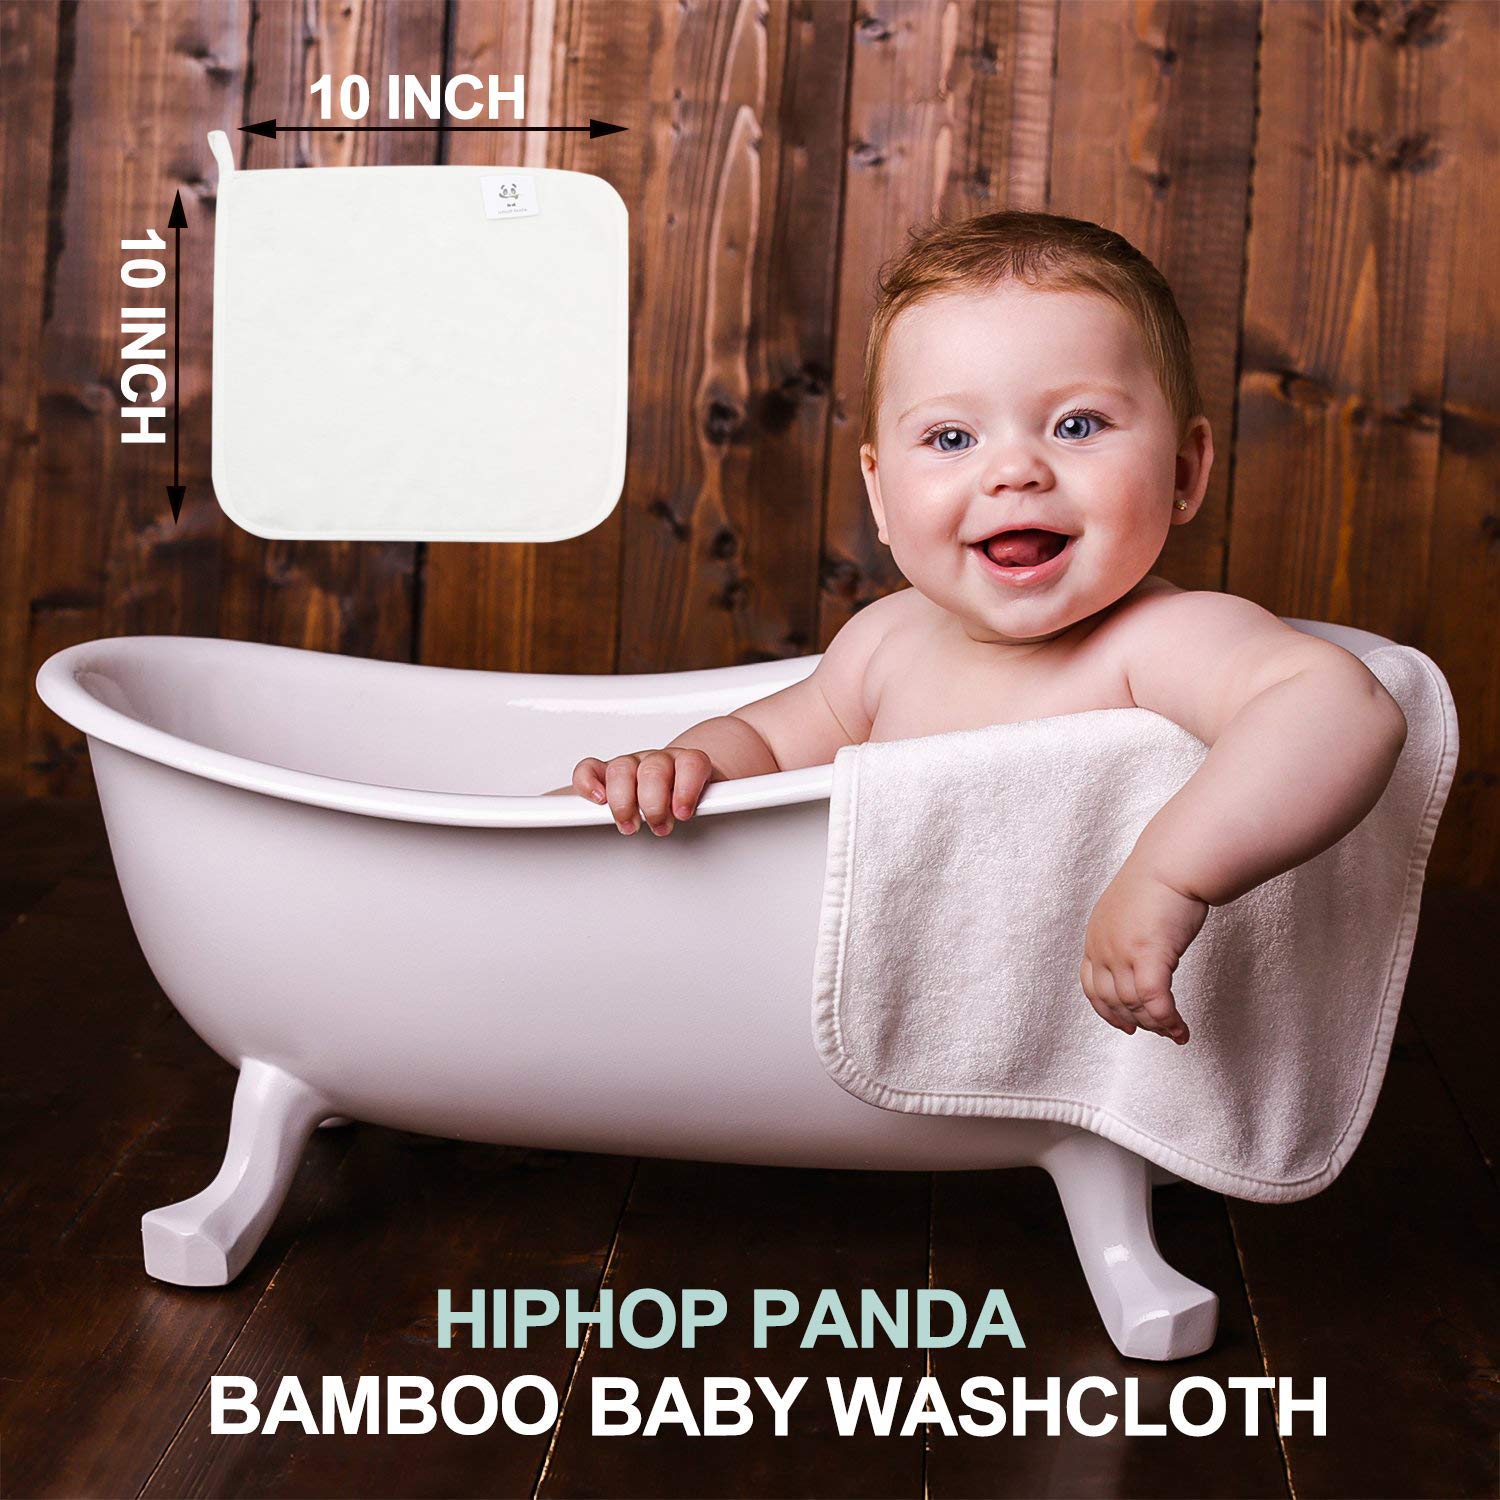 Bamboo Baby Infant Bath Towels Soft Breathable Hypoallergenic Anti-Bacterial (6 Pack)